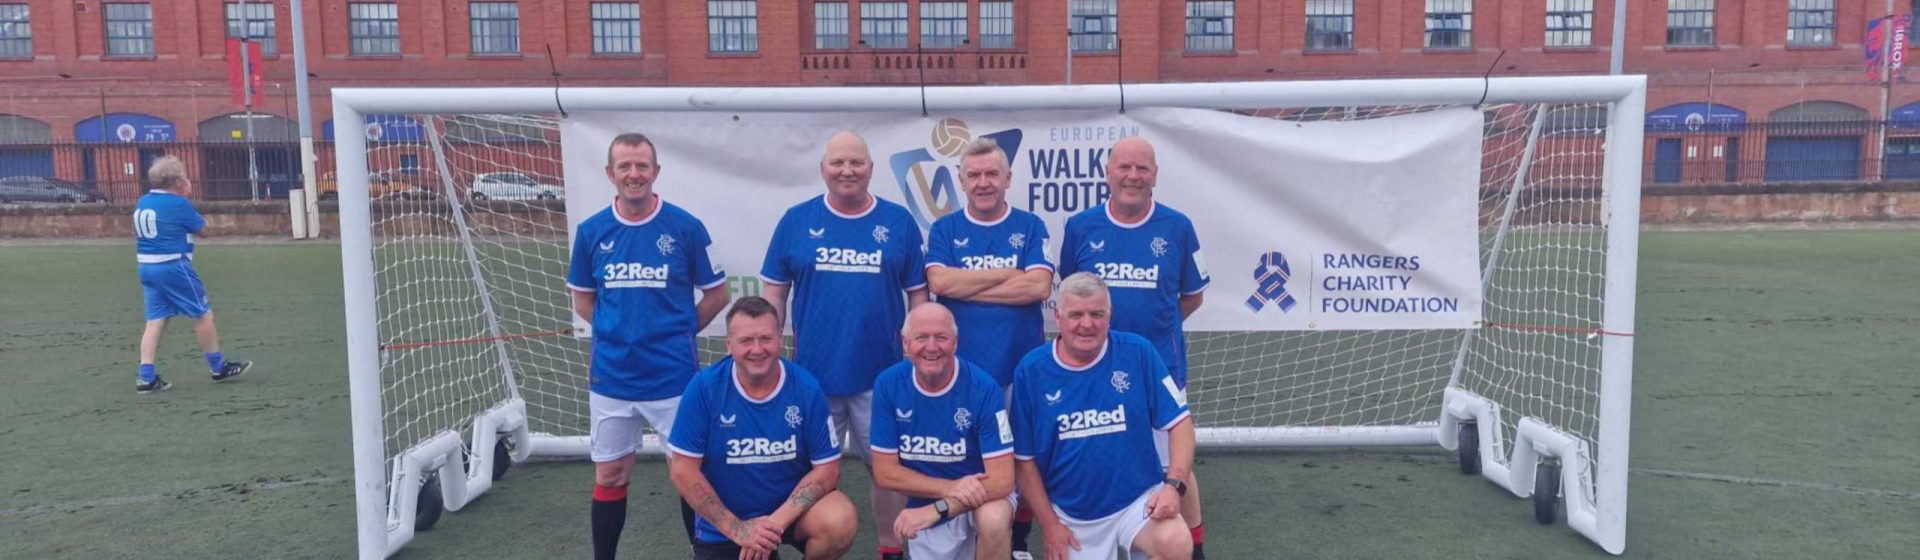 Rangers Charity Foundation Hosts EFDN Walking Football Tournament At The ICC header